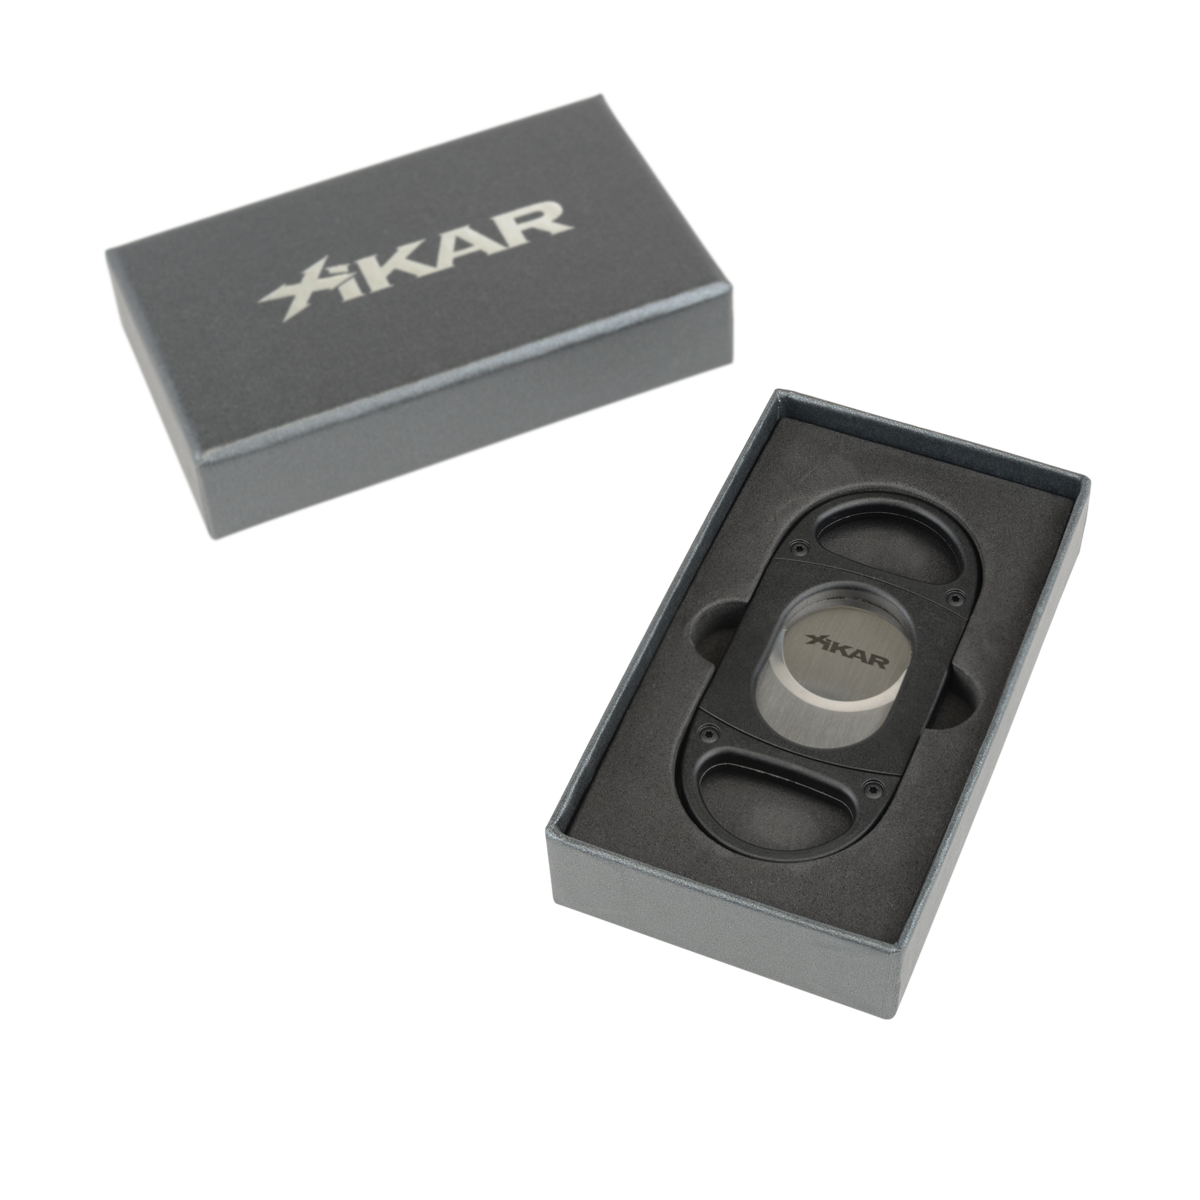 XIKAR® X8 Cigar Cutter-Cigar Cutters & Punches-Wine Whiskey and Smoke